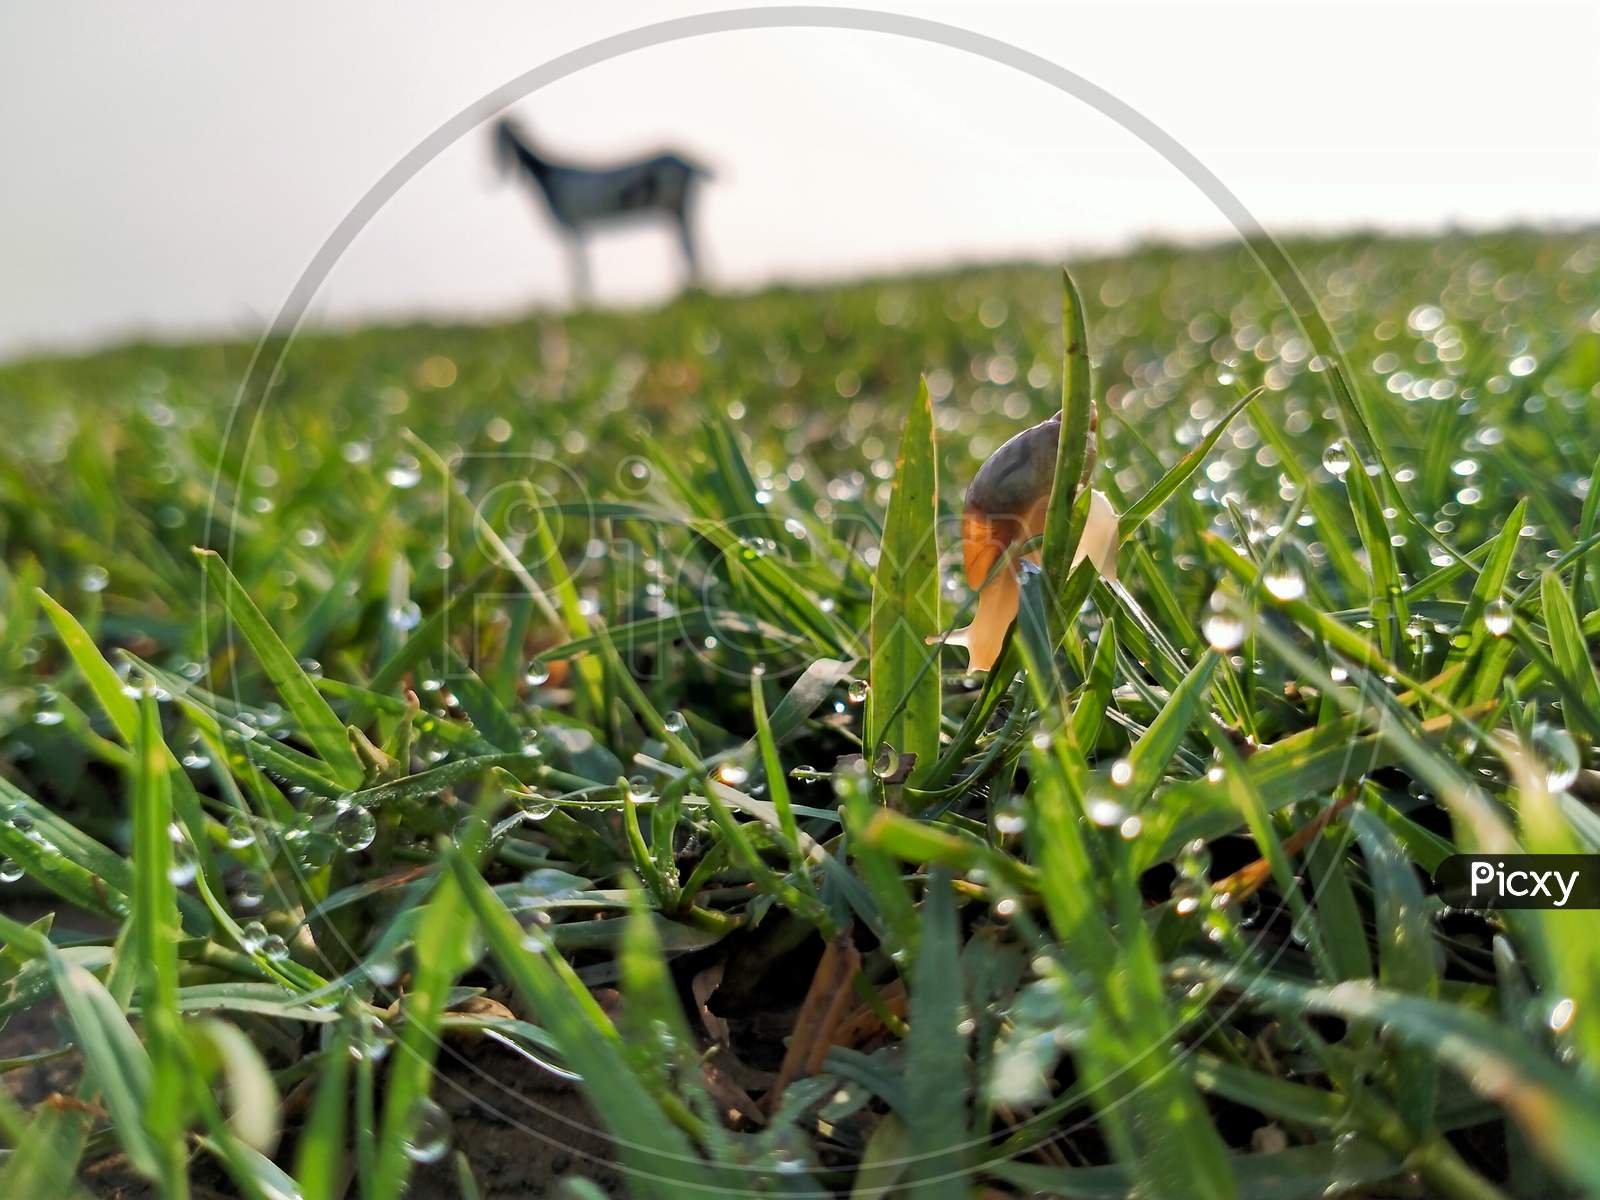 Snail on the blade of grass.